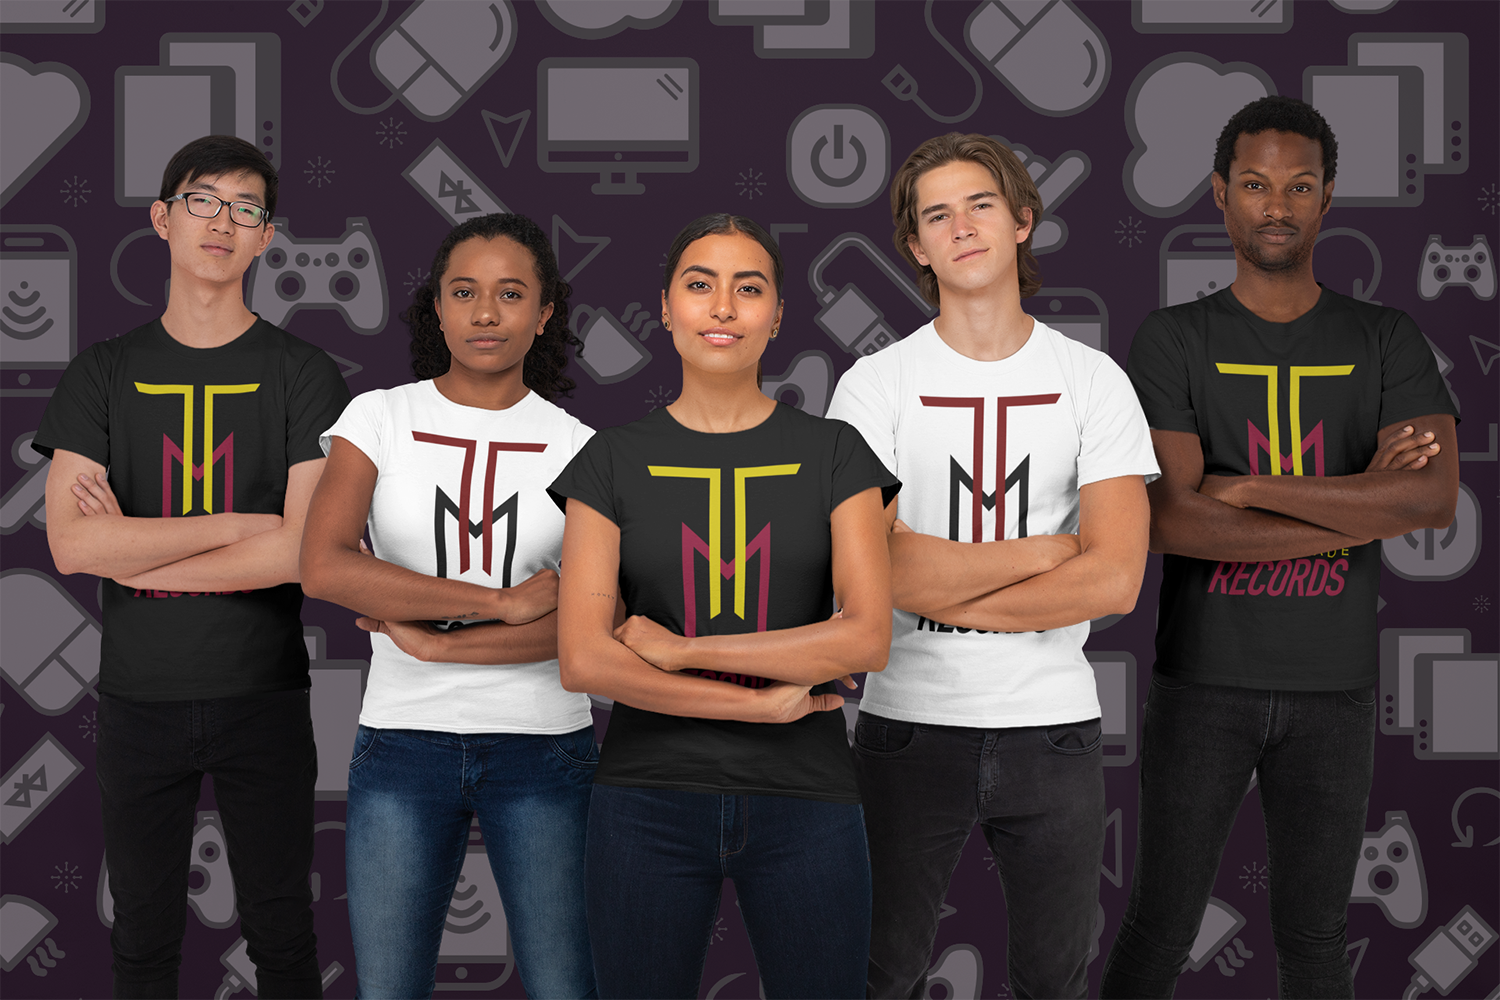 mockup-of-a-diverse-esport-team-wearing-t-shirts-26392.png